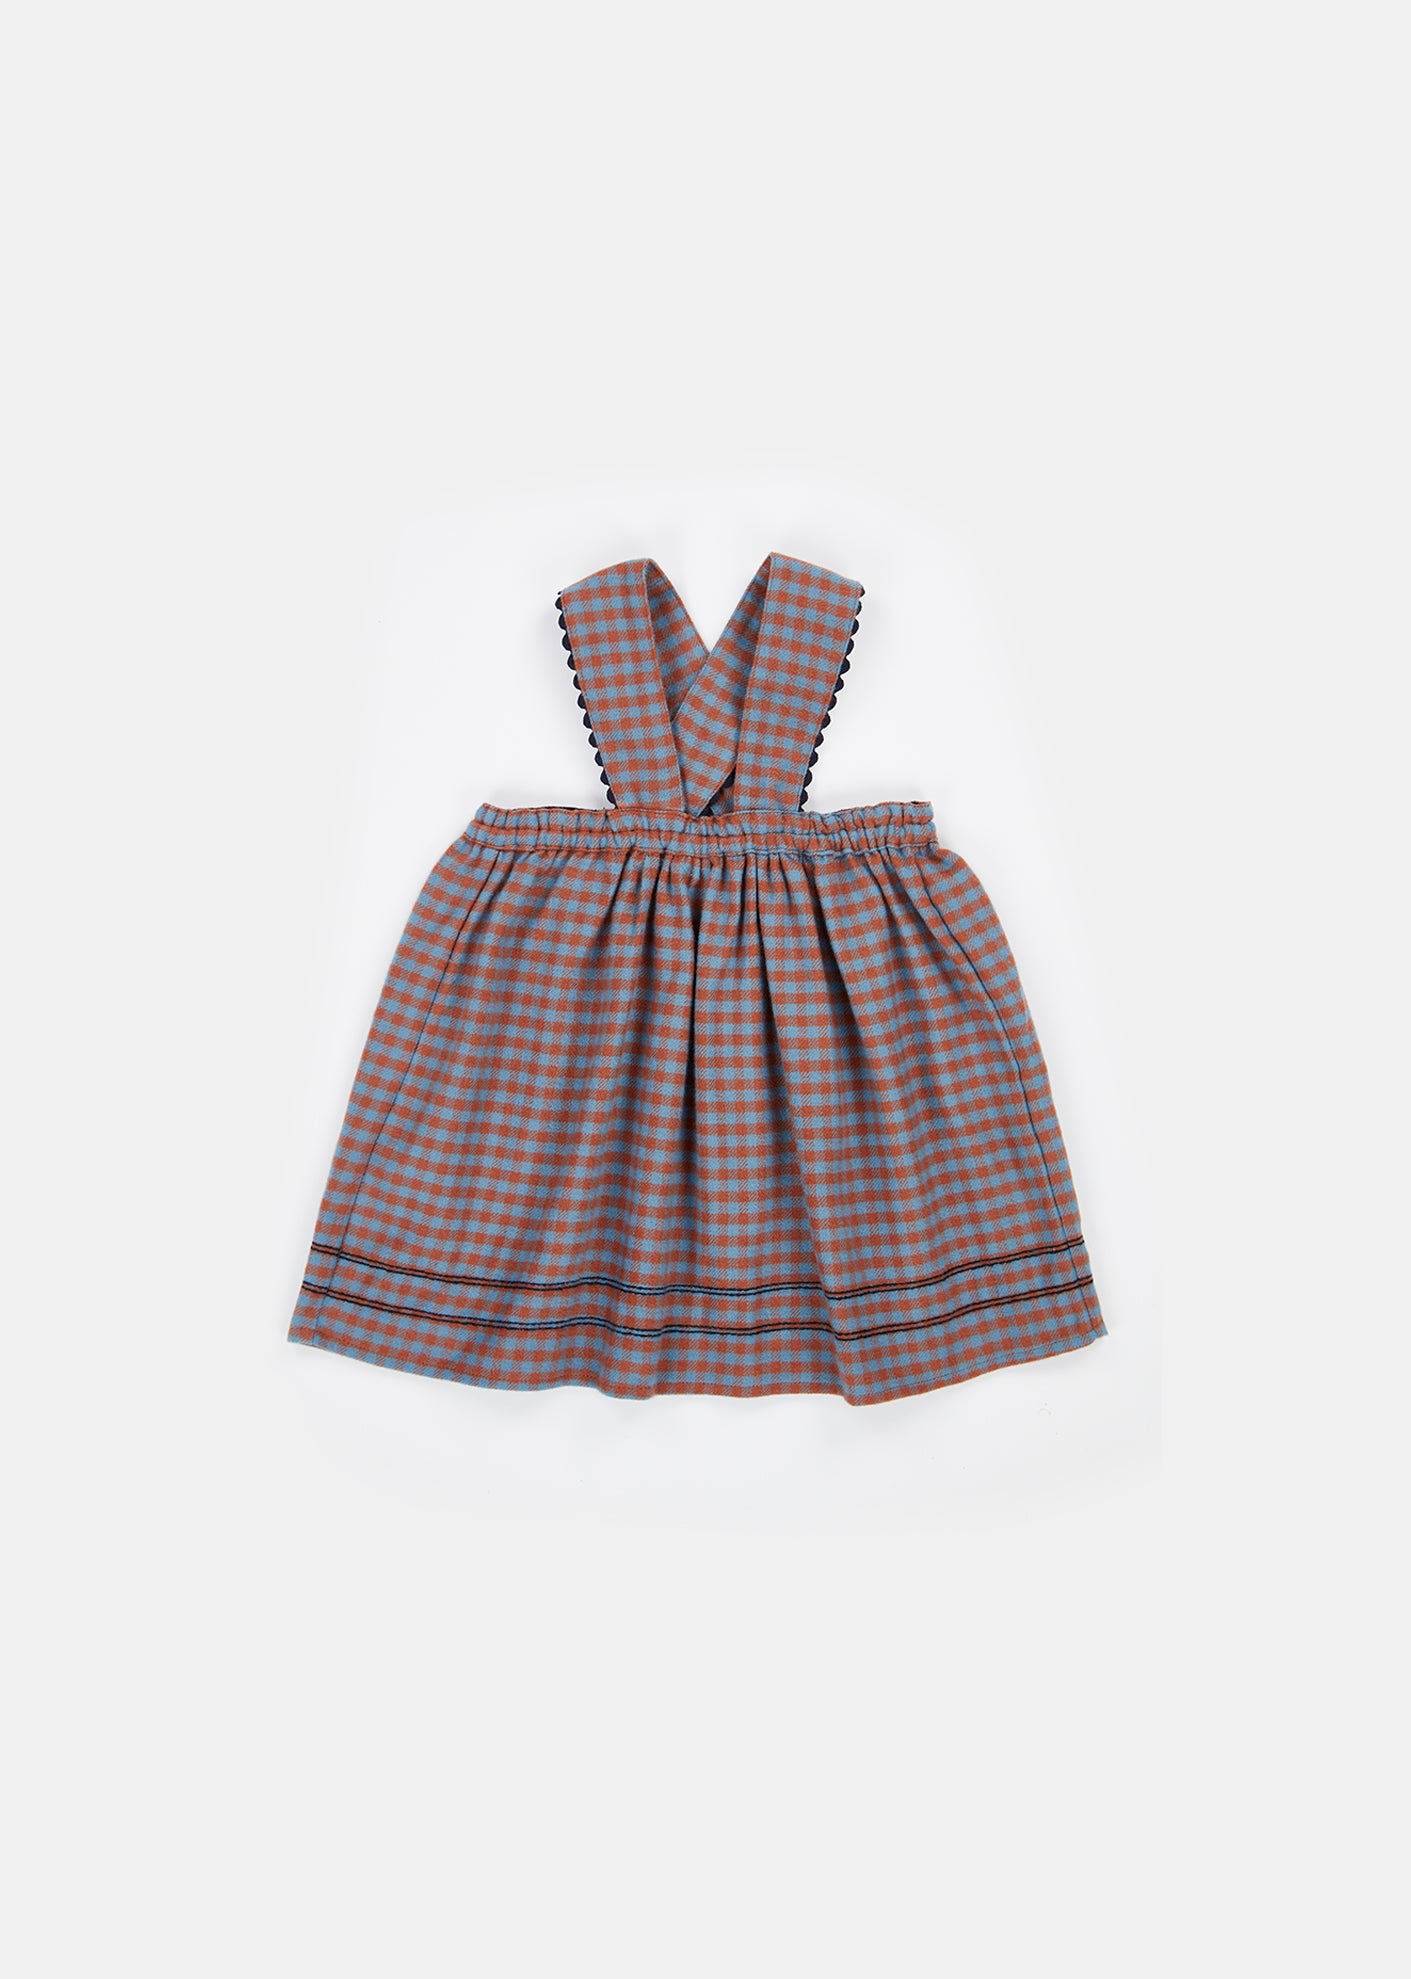 WHITEBEAM BABY DRESS BROWN/BLUE CHECK FRONT